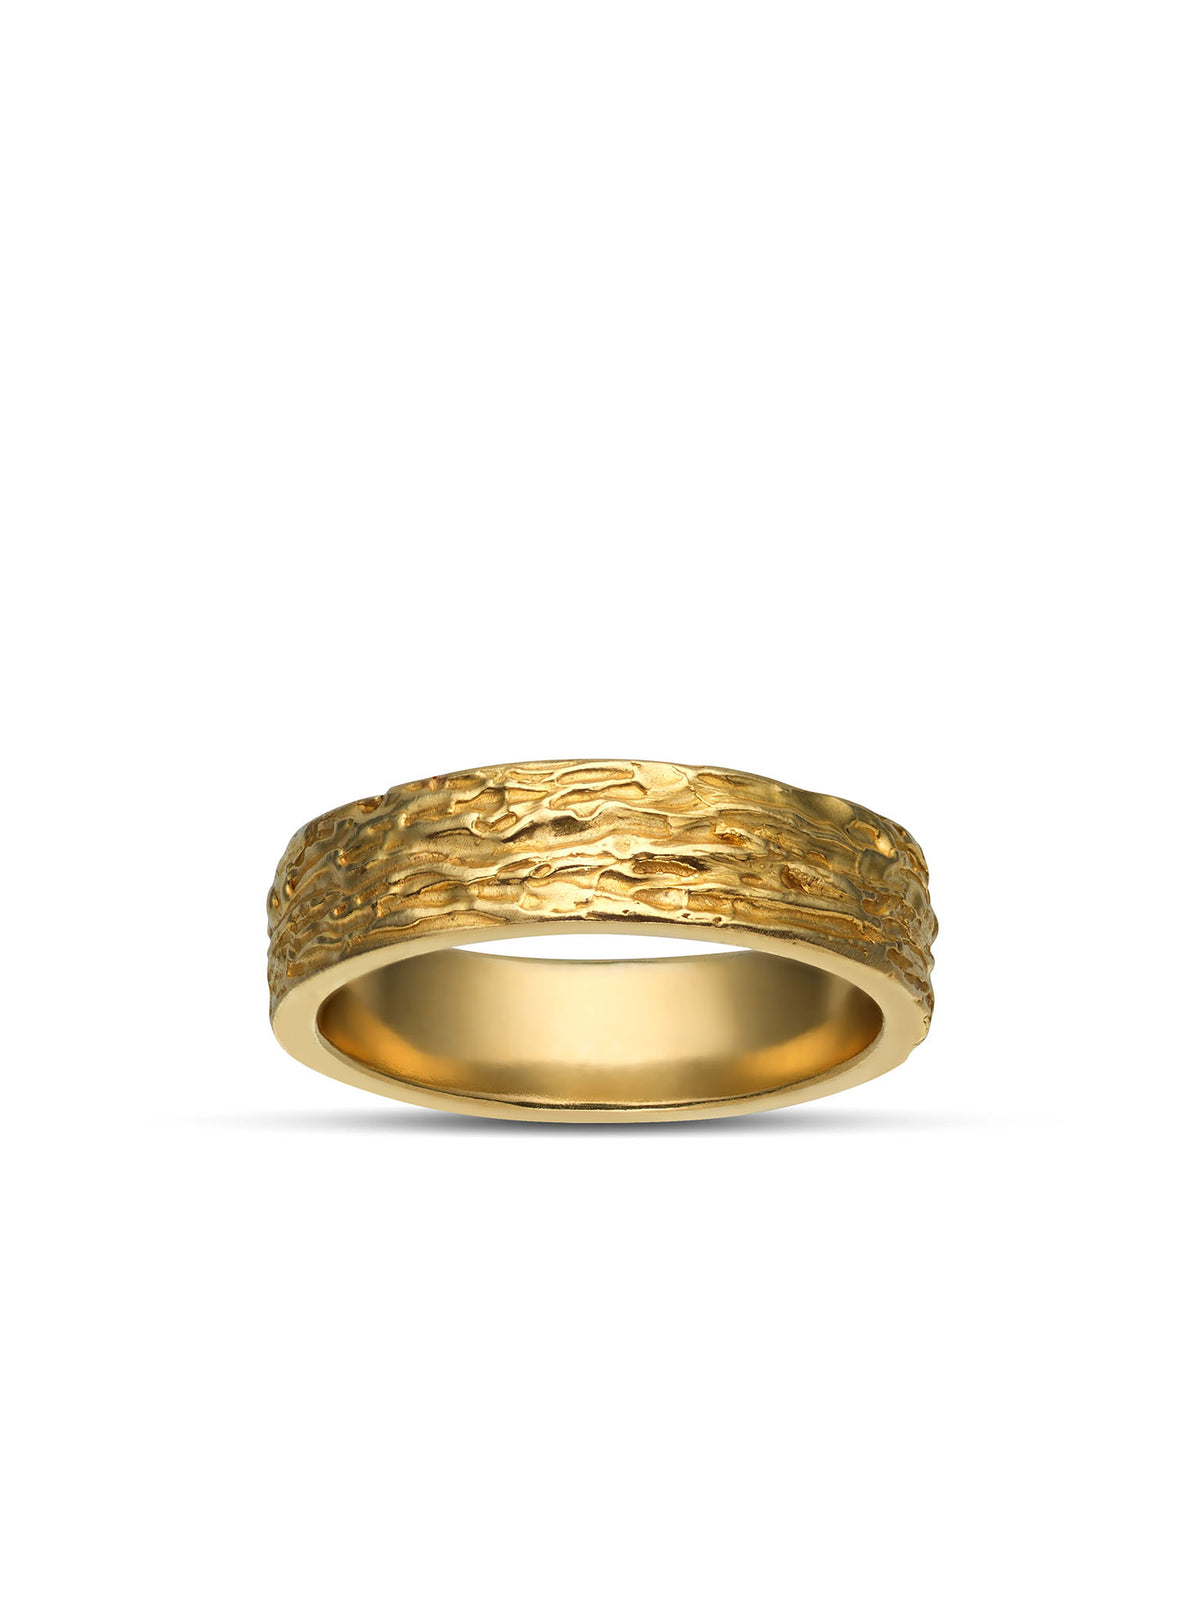 Coral Reef Wedding Band / Gold